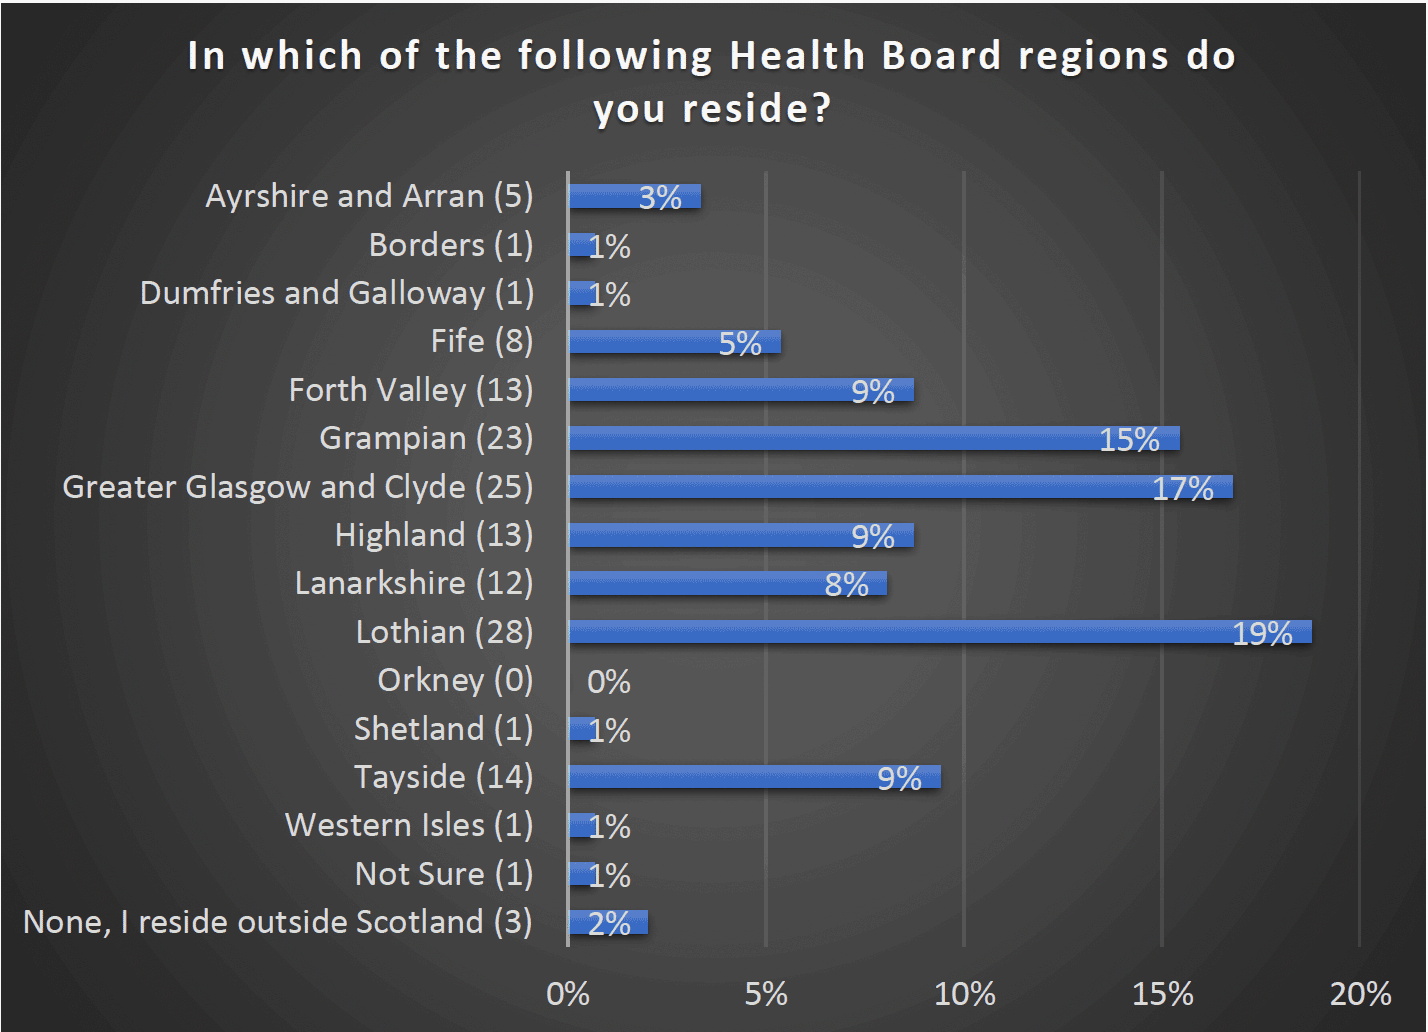 which of the following Health Board regions do you reside? - Ayrshire and Arran (5) 3%, Borders (1) 1%, Dumfries and Galloway (1) 1%, Fife (8) 5%, Forth Valley (13) 9%, Grampian (23) 15%, Greater Glasgow and Clyde (25) 17%, Highland (13) 9%, Lanarkshire (12) 8%, Lothian (28) 19%, Orkney (0), Shetland (1) 1%, Tayside (14) 9%, Western Isles (1) 1%, Not Sure (10) 1%, None, I reside outside Scotland (3) 2%